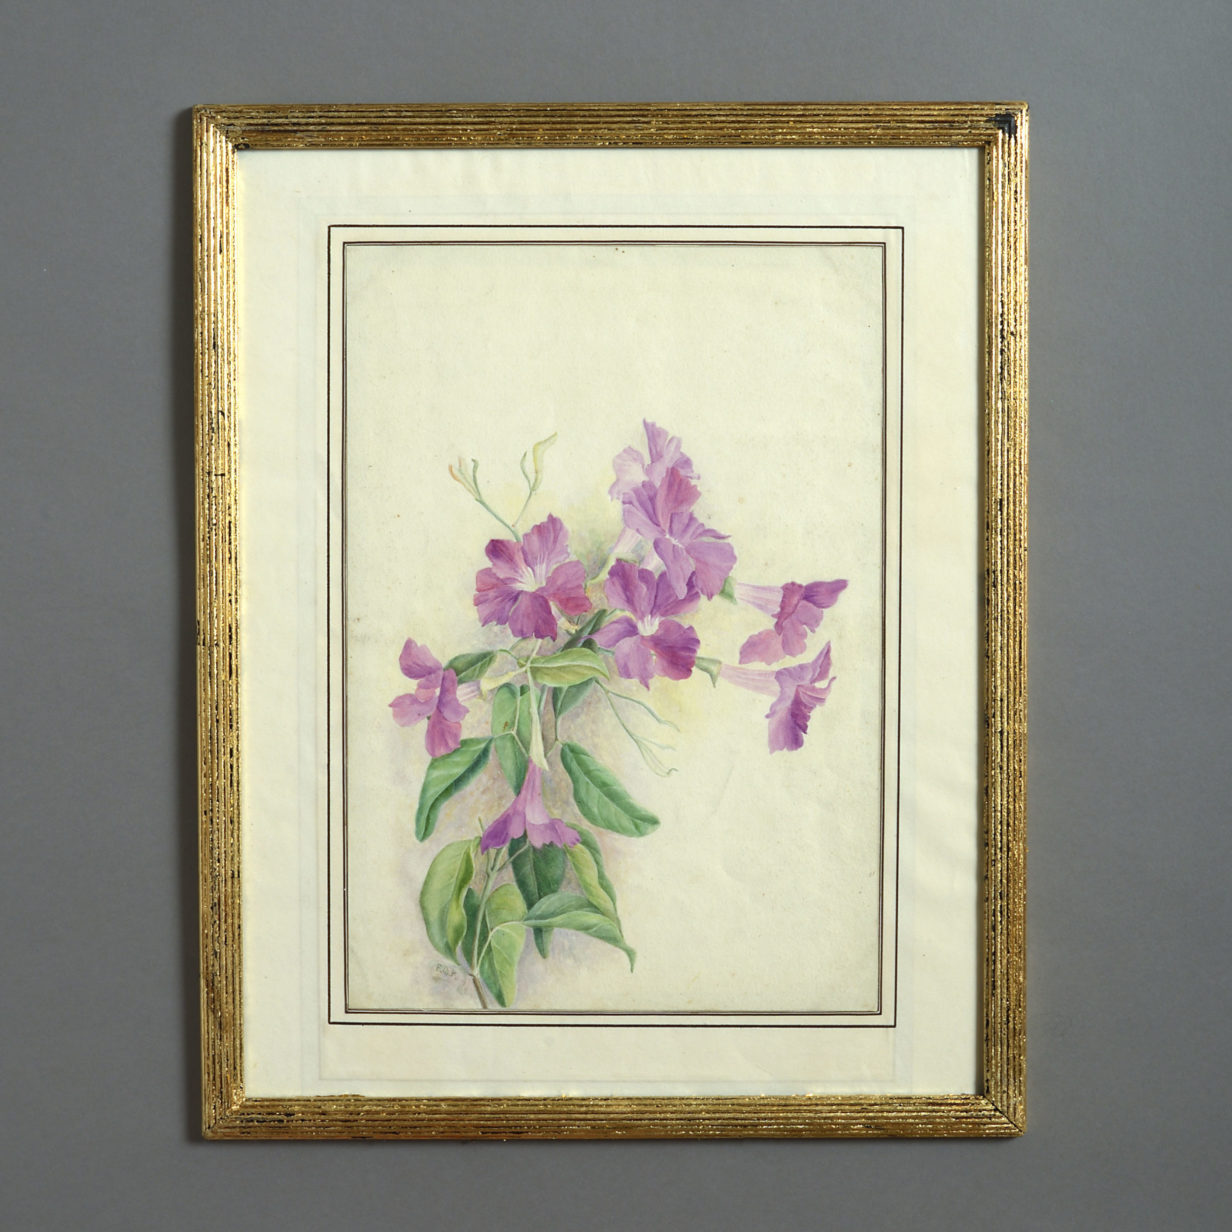 A late 19th century botanical watercolour depicting clematis